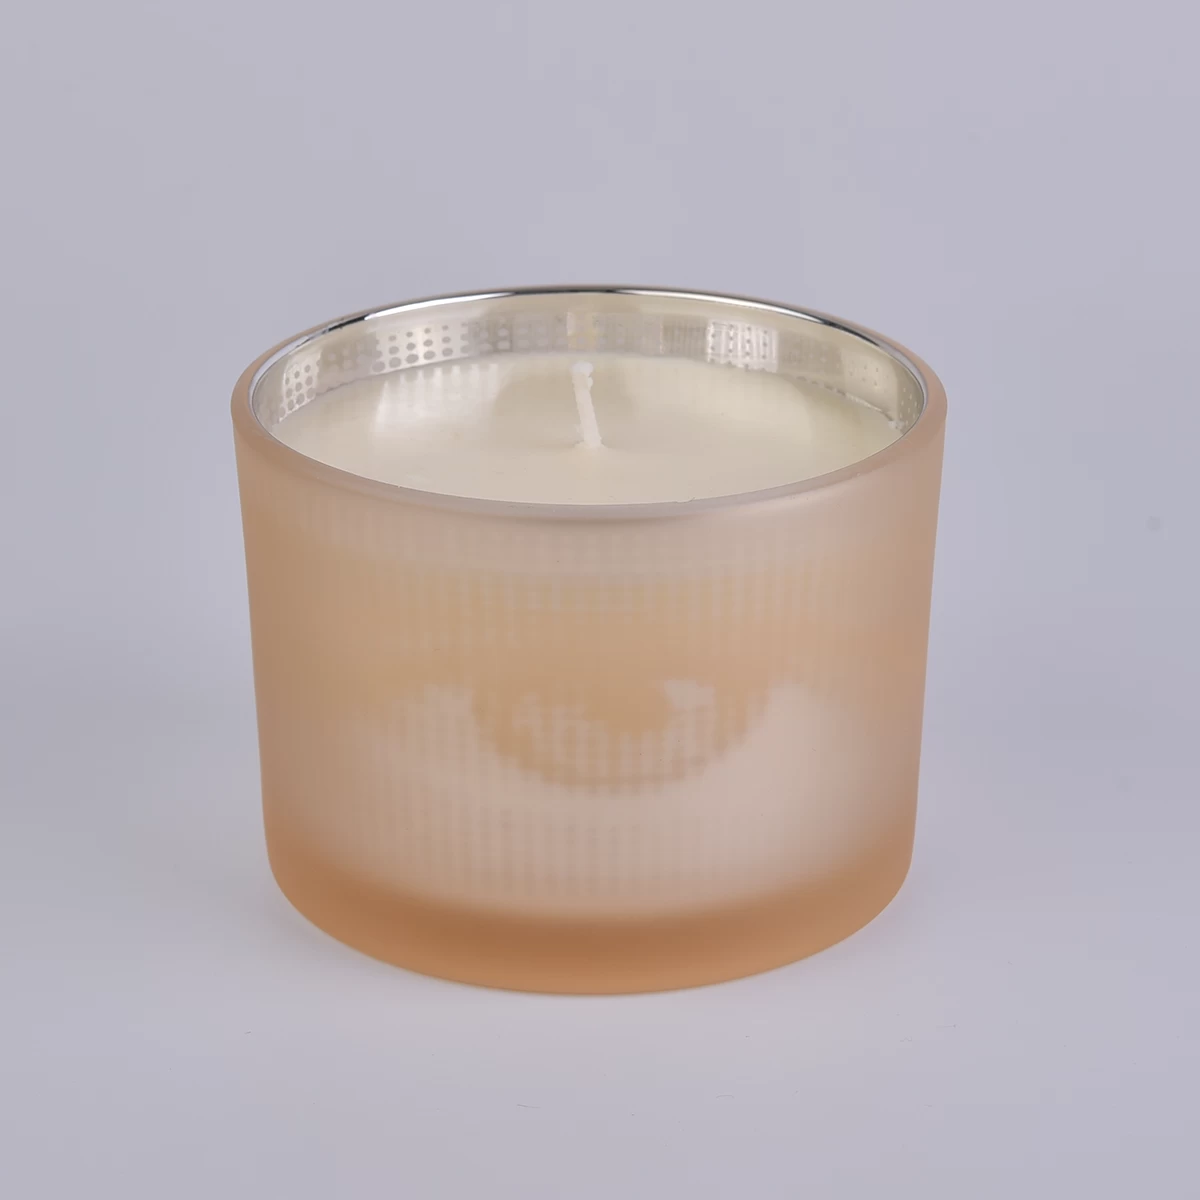 unique glass candle container with wood lid, decorative glass vessel for candle making